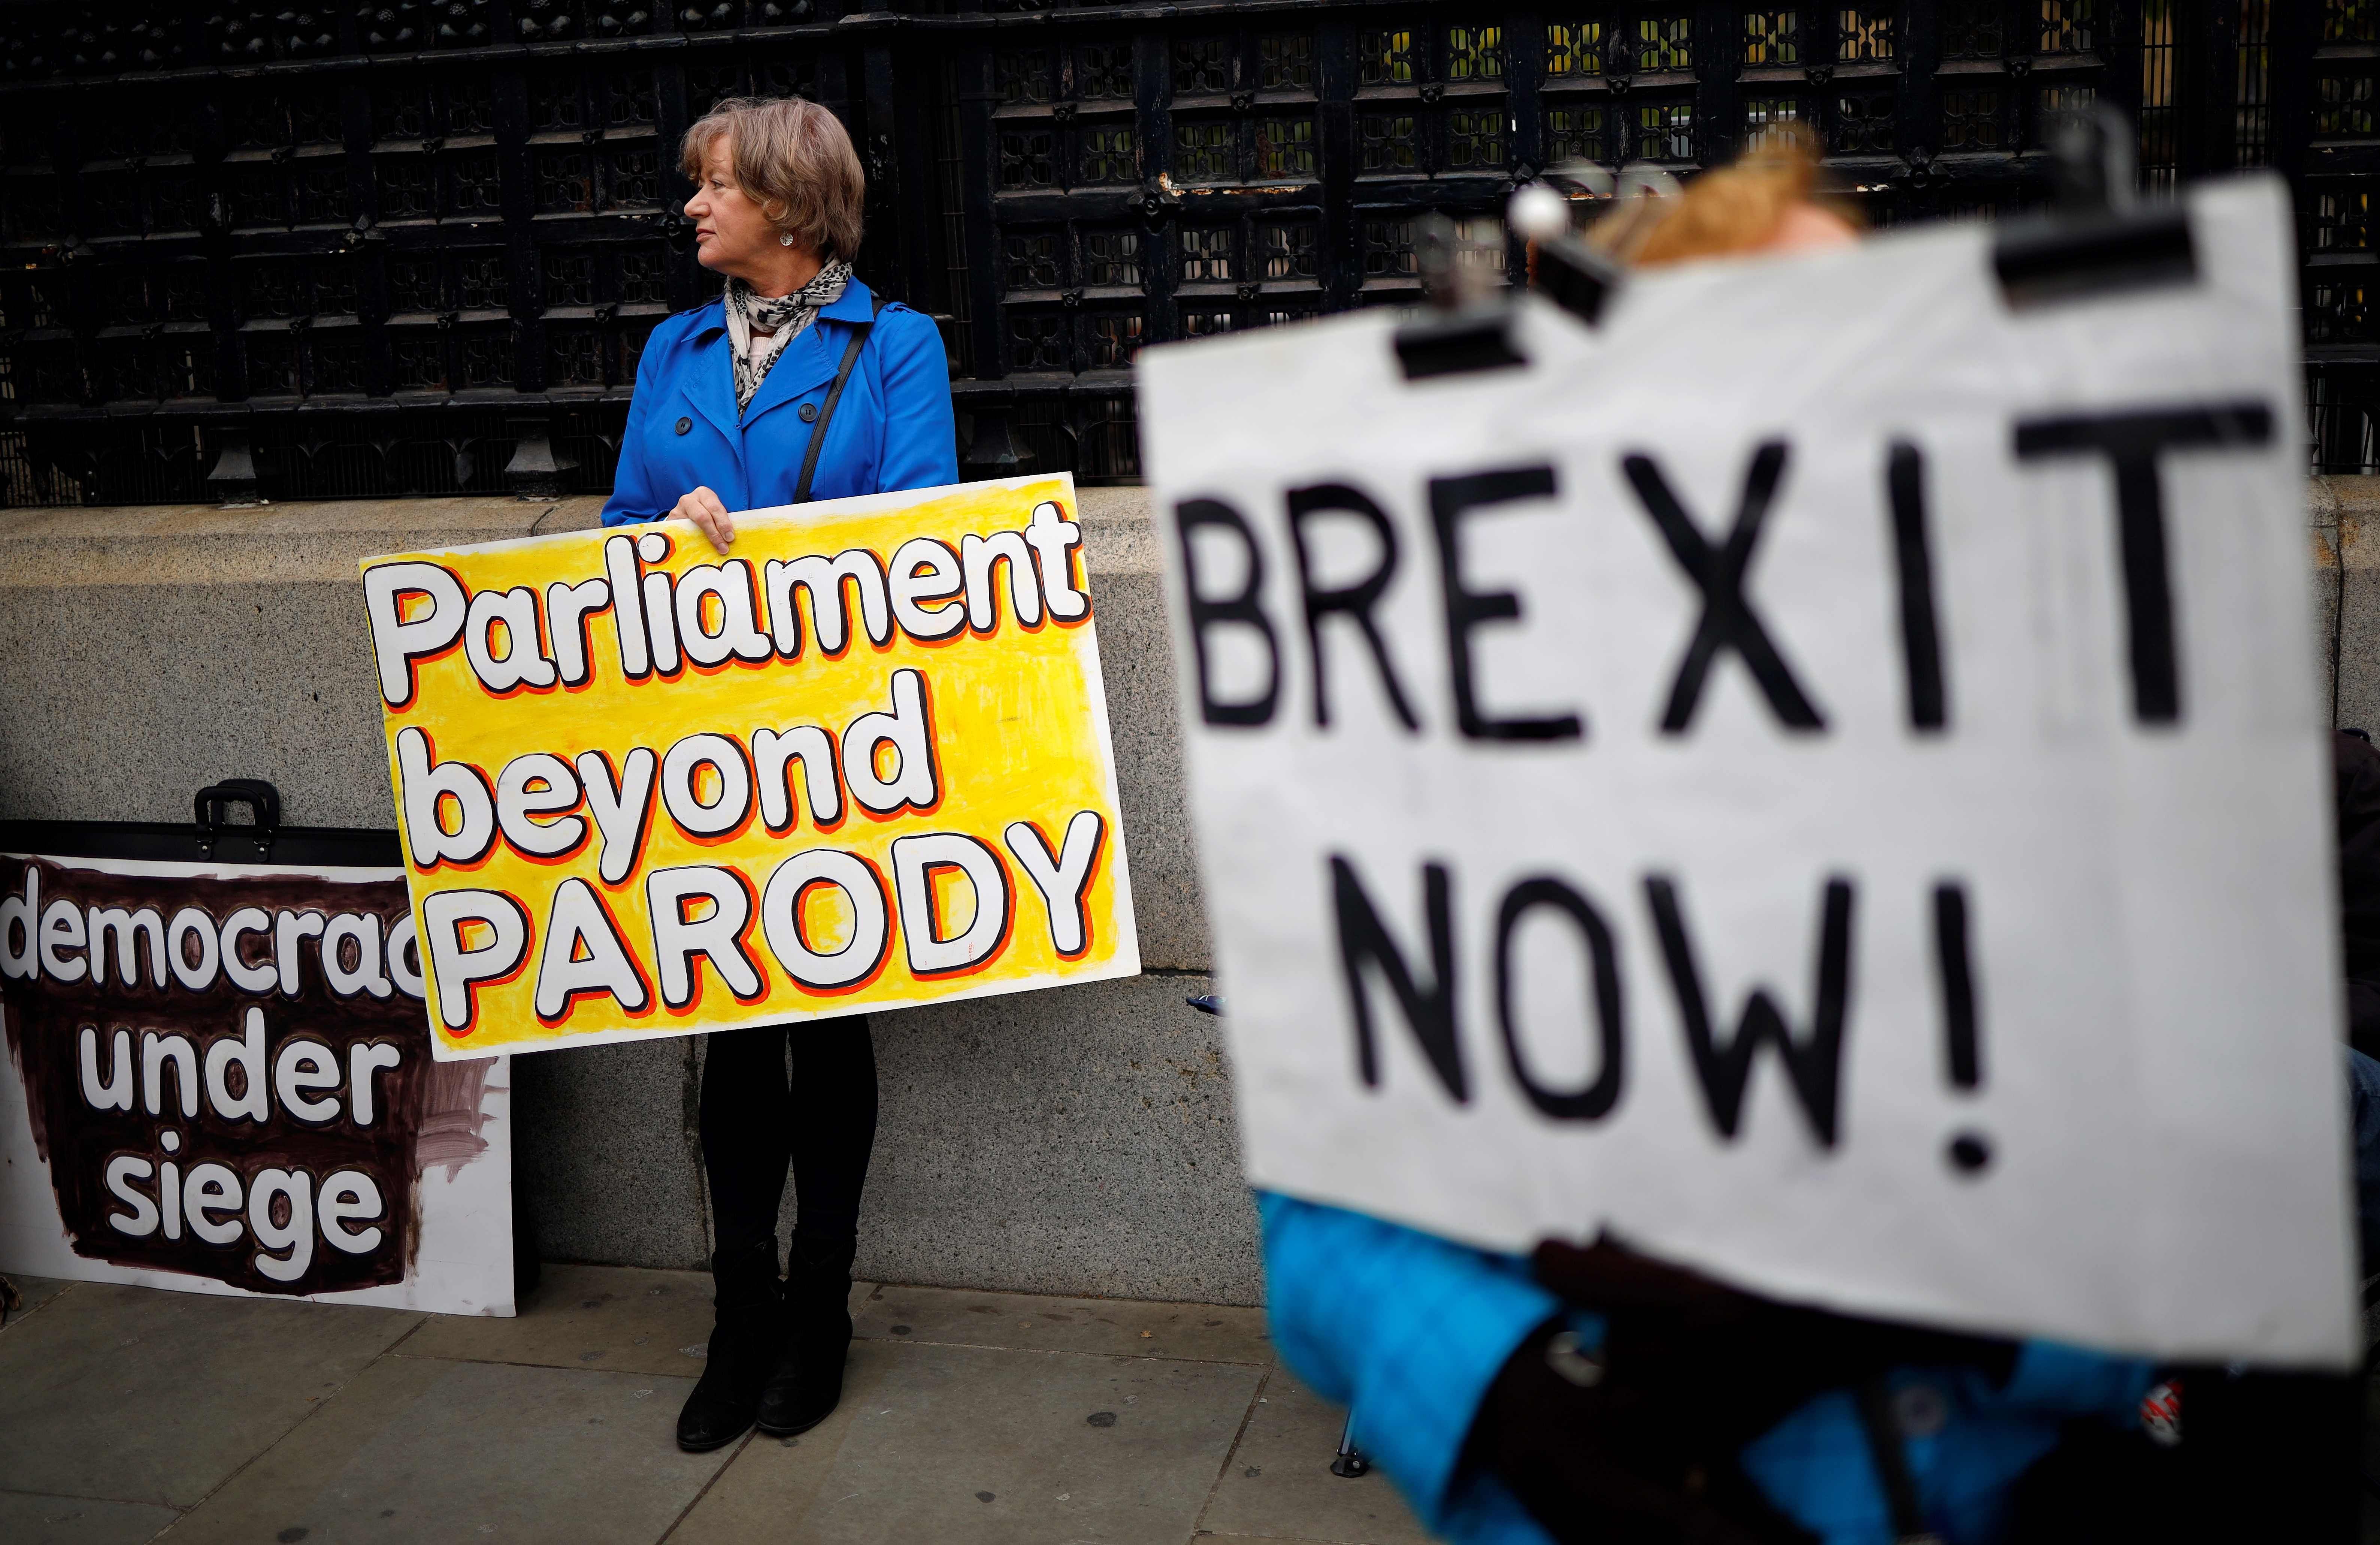 Pro-Brexit activists hold placards as they demonstrate outside the Houses of Parliament in London. (AFP Photo)